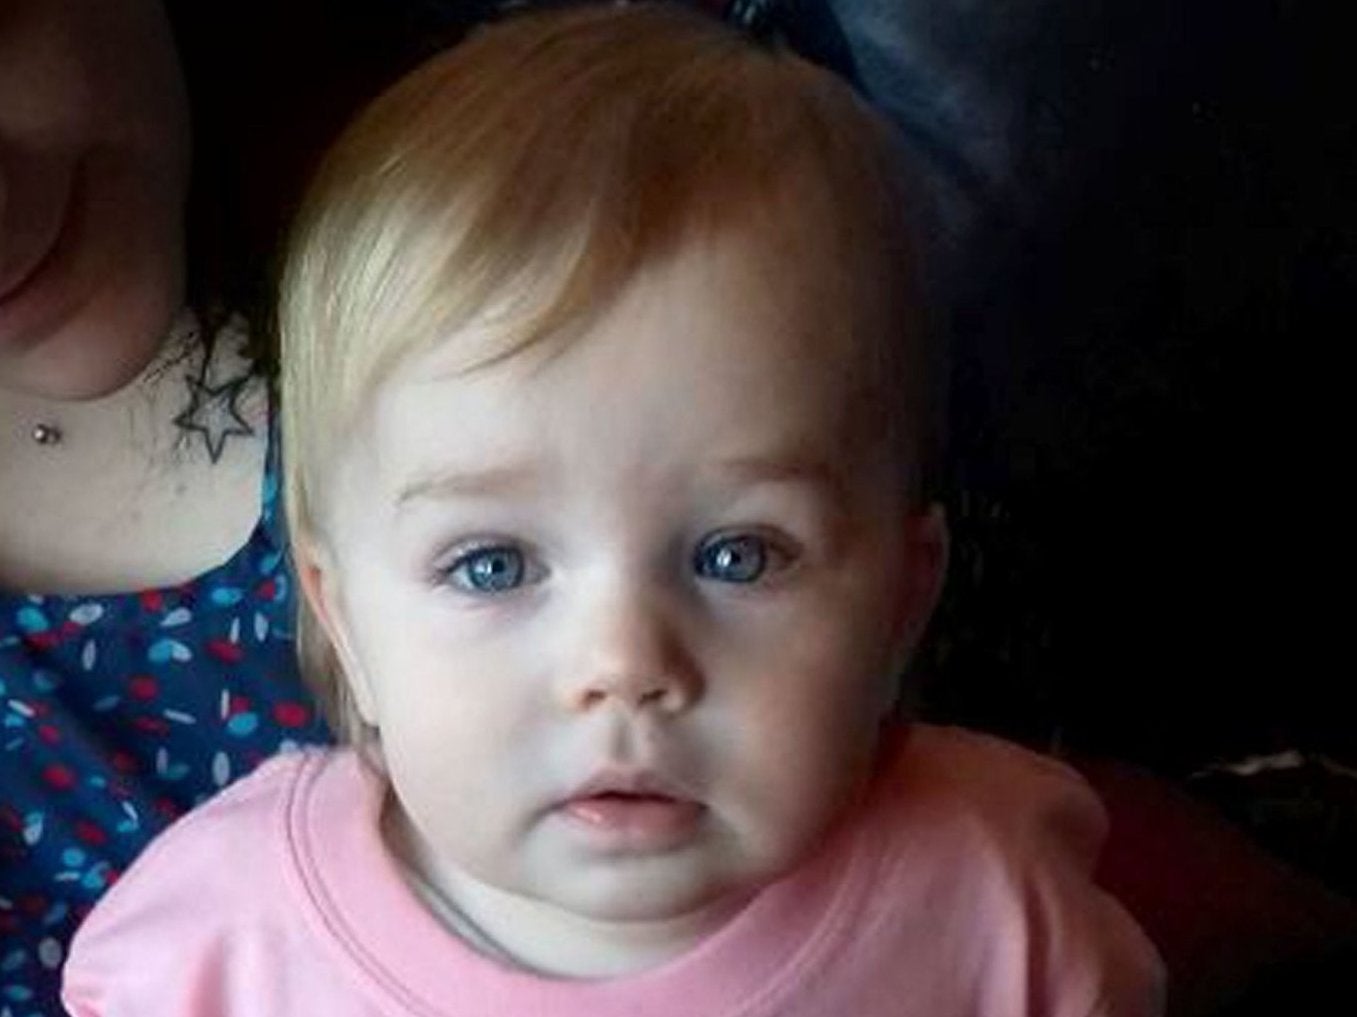 Police named the one-year-old girl as Lexi Bergene